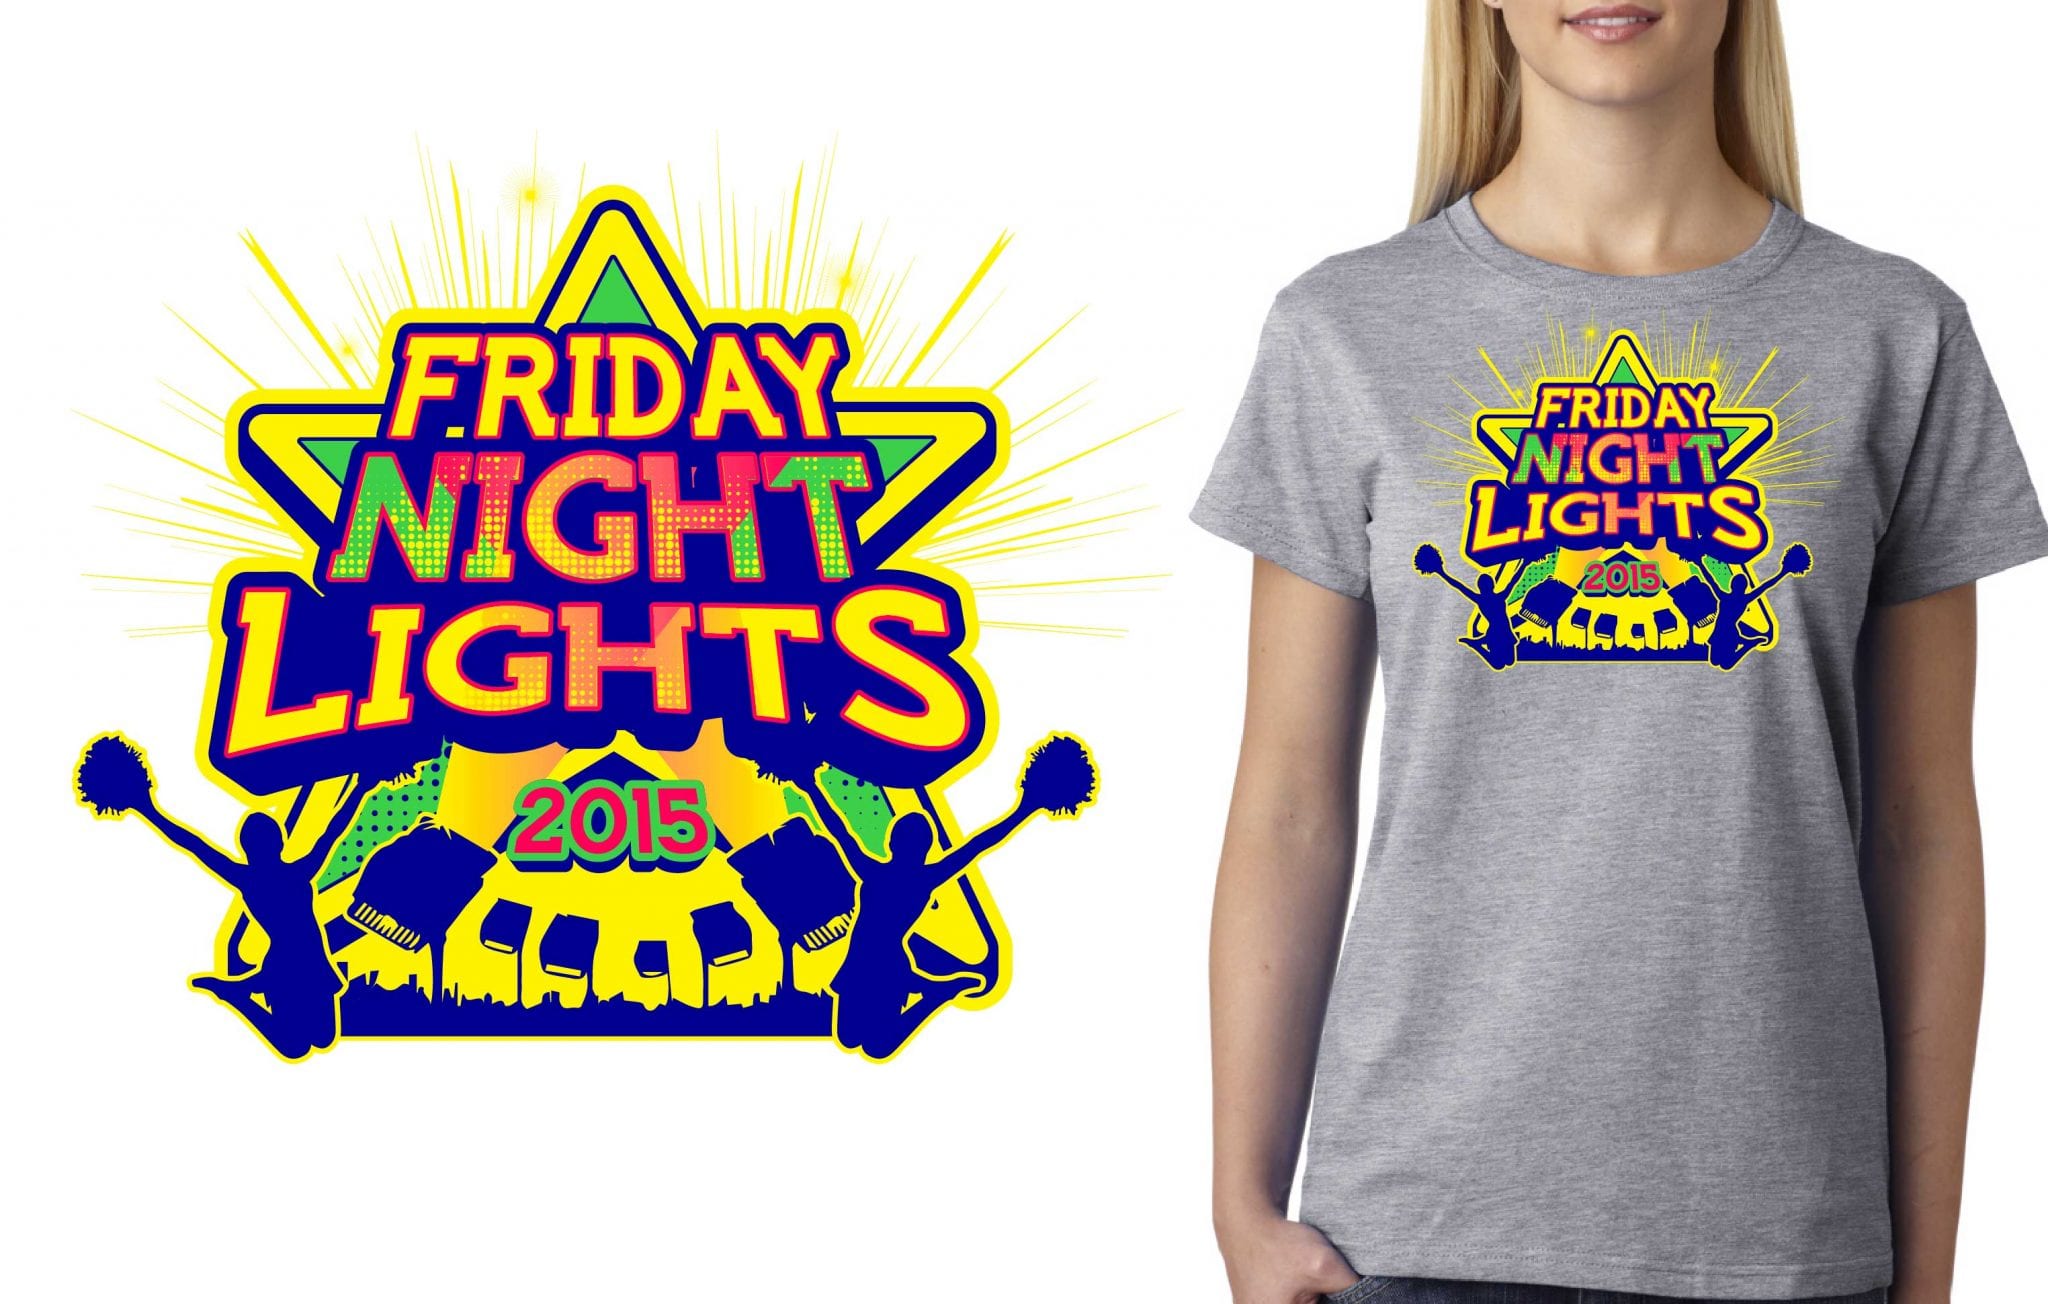 Shirt Vector Logo Design for cheer and dance event called 2015 Friday Night Lights